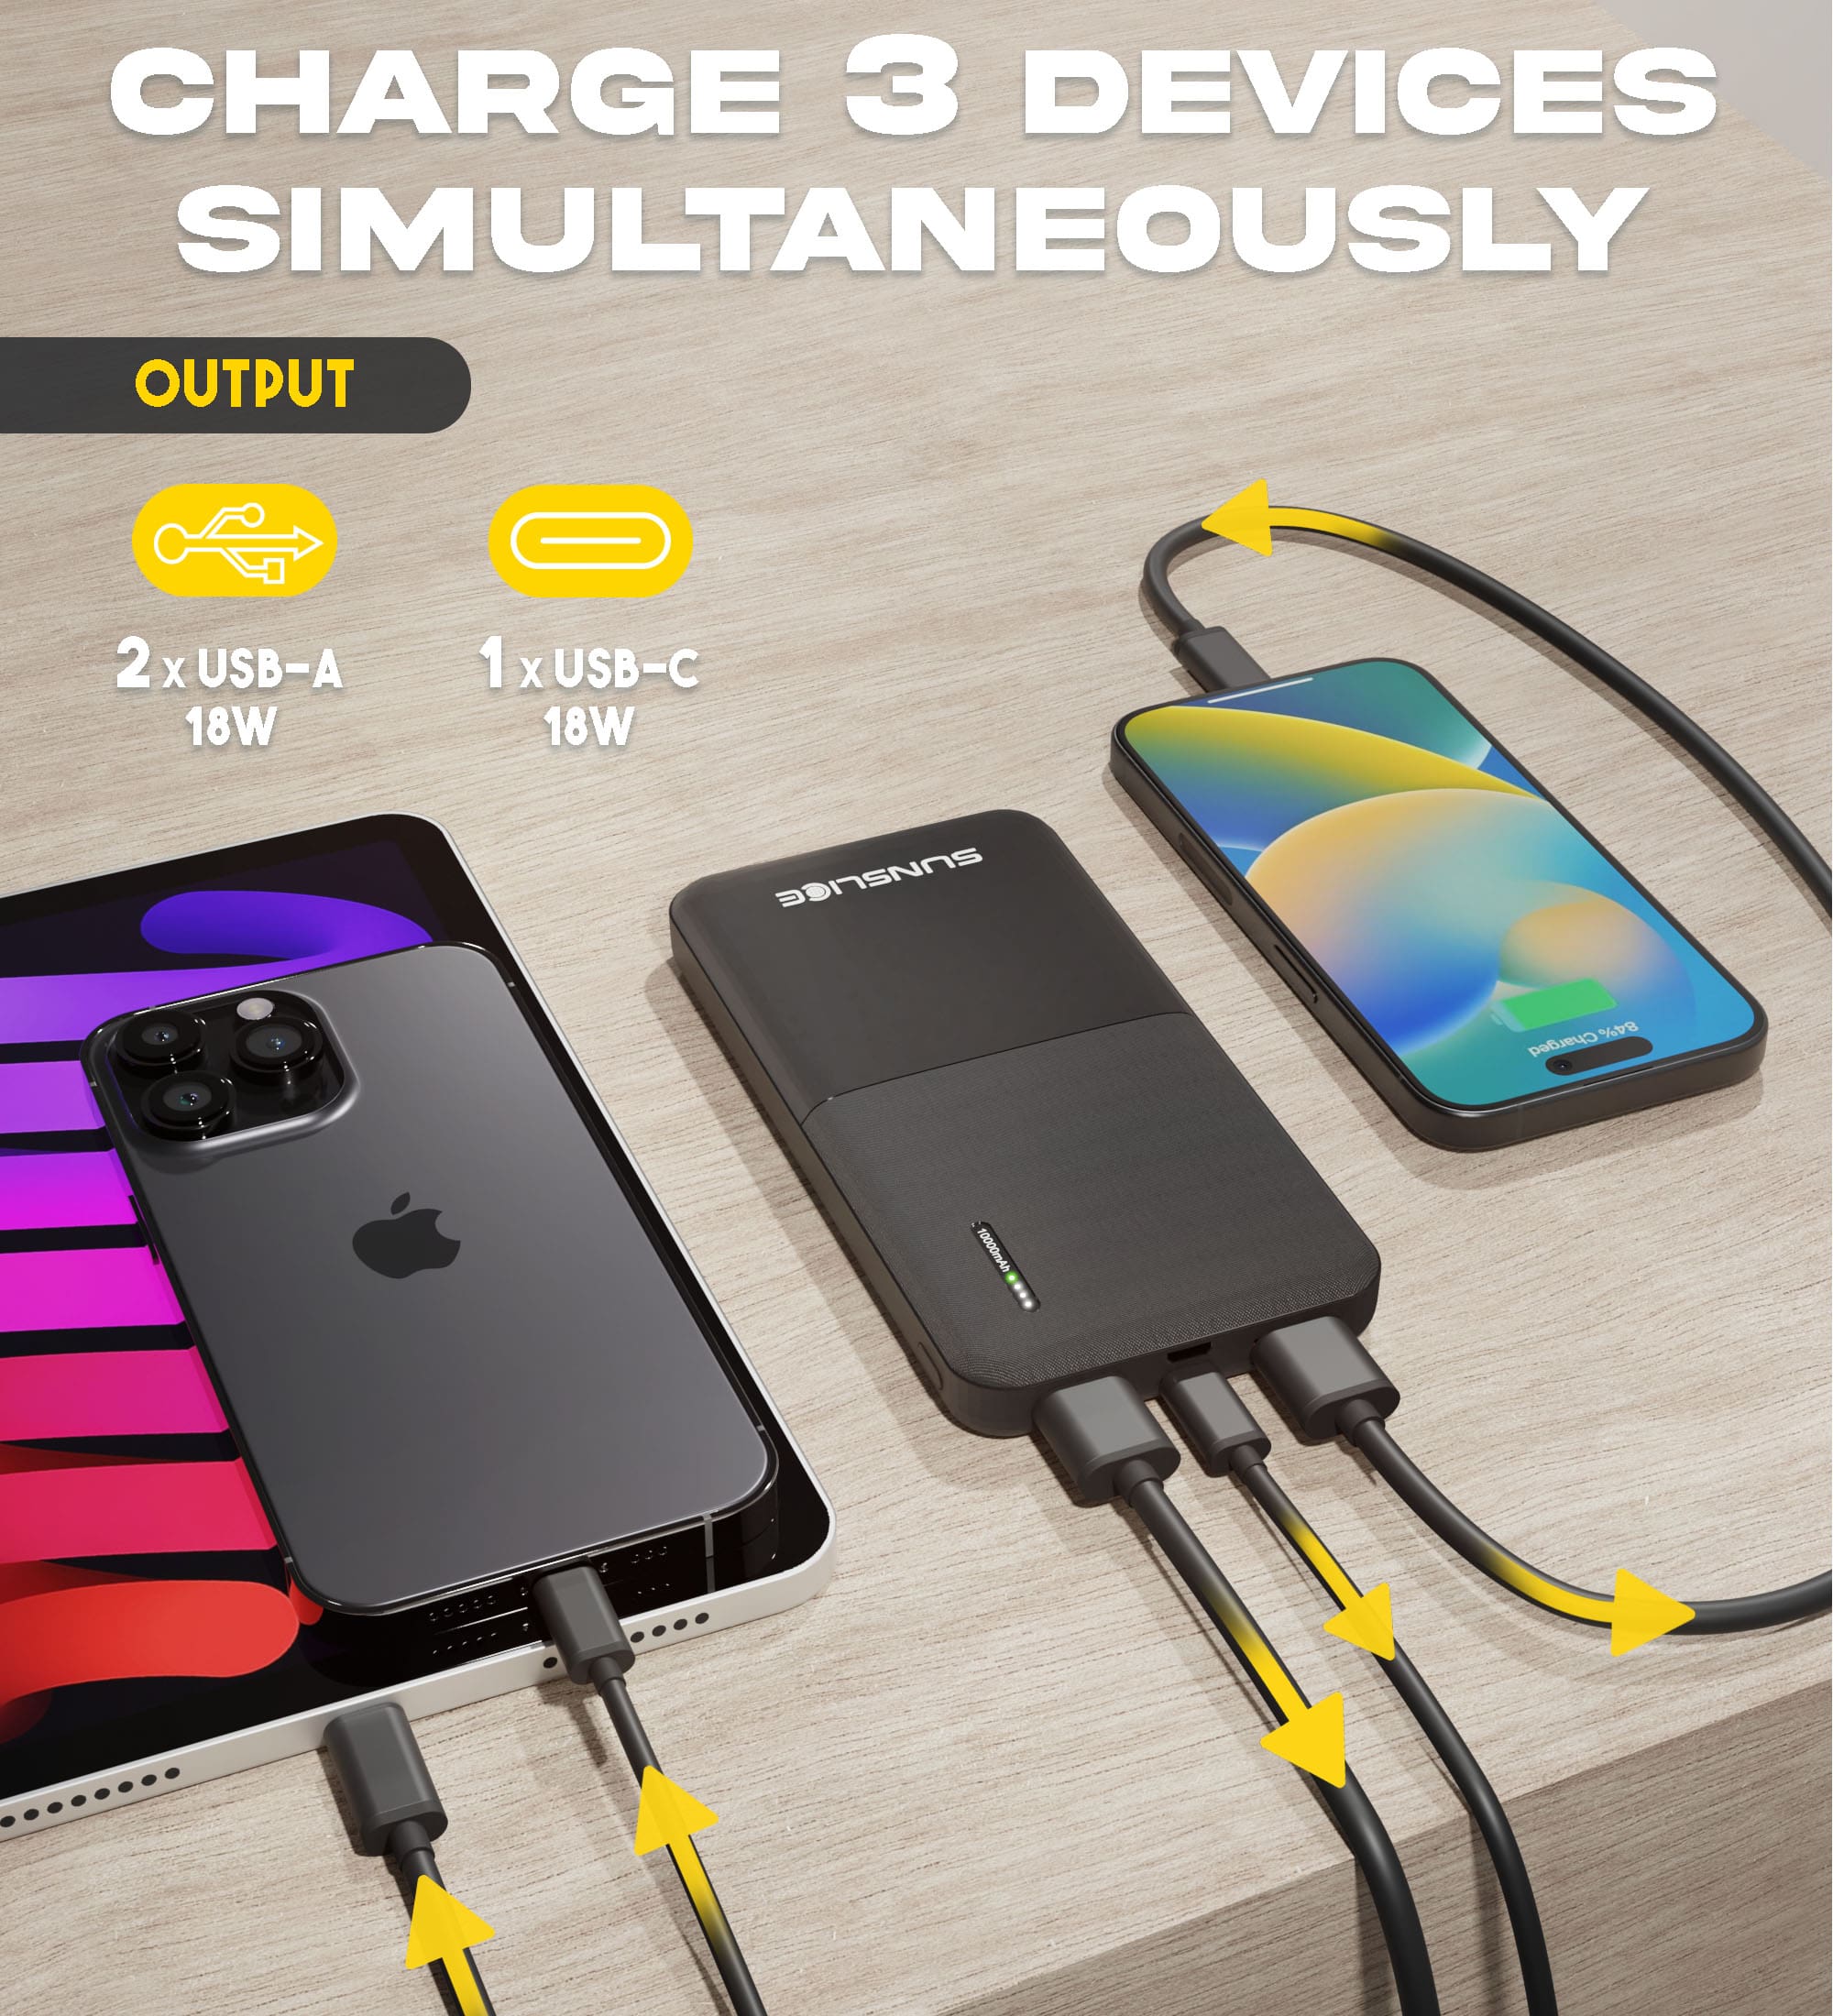 power bank who charge  devices simulataneously : output  2 usb-A, 1 usb-c